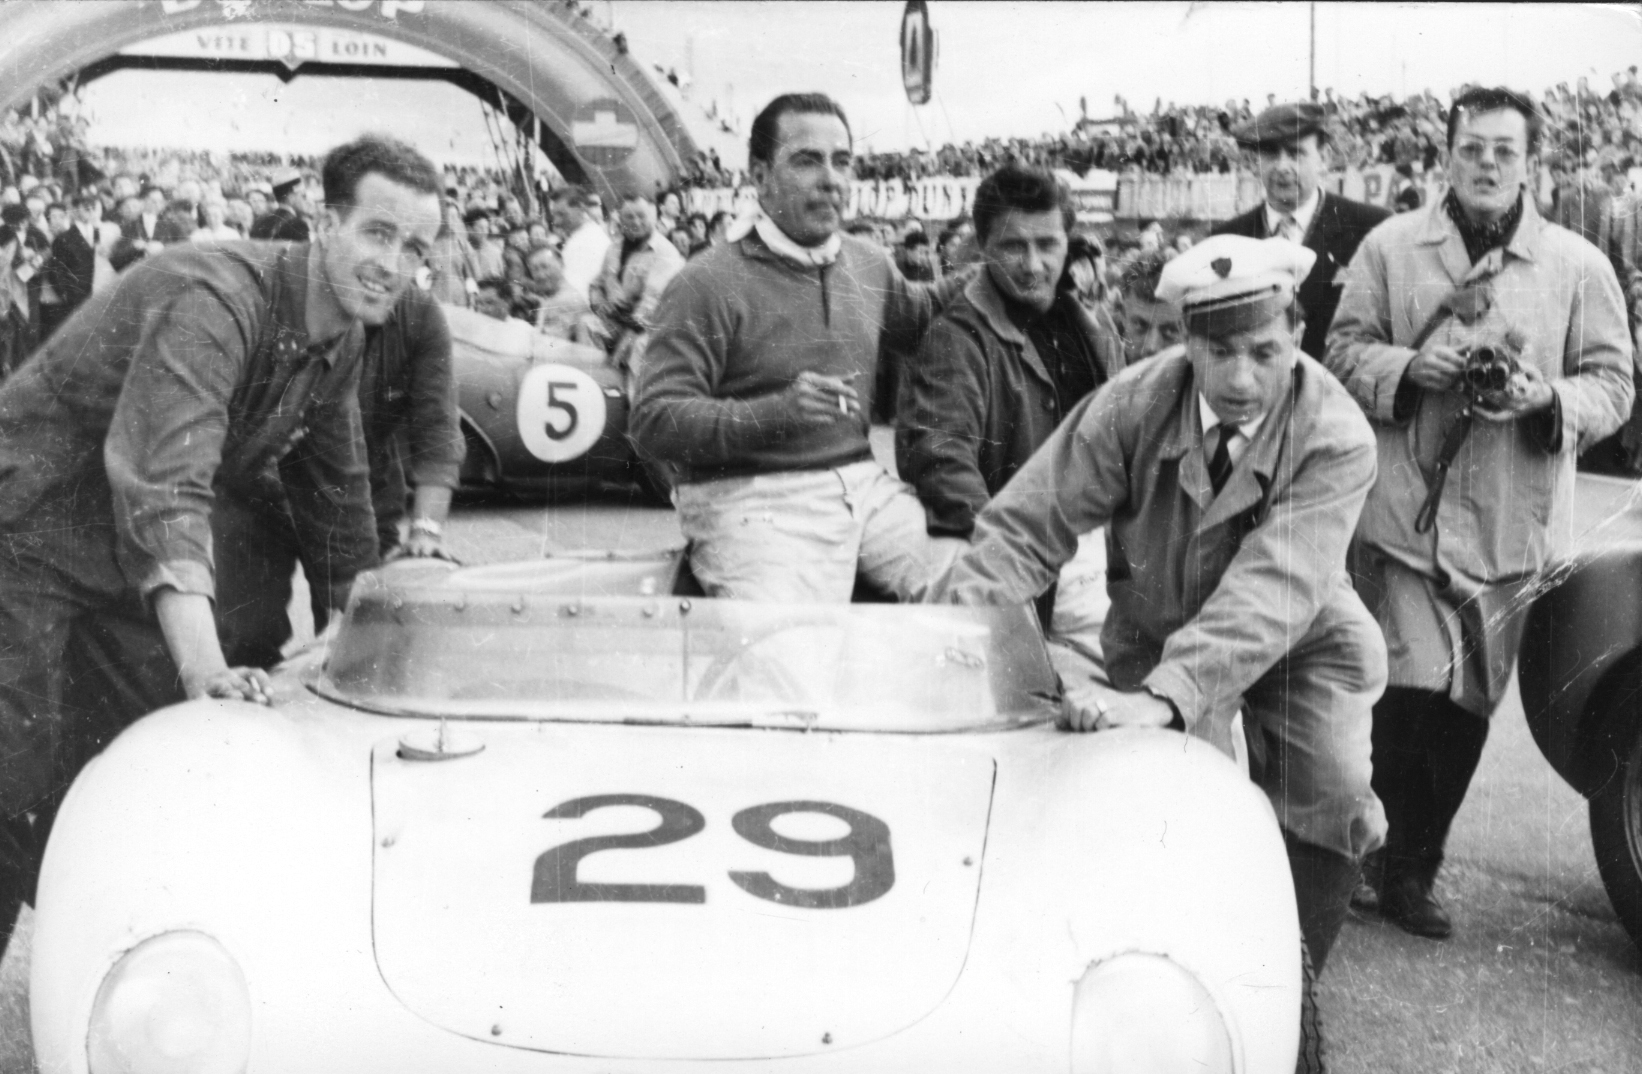 Jean Behra, a top French driver with whom Herrmann shared a car at the 1958 24 Hours, died at the wheel of an AVUS one day before Herrmann survived.